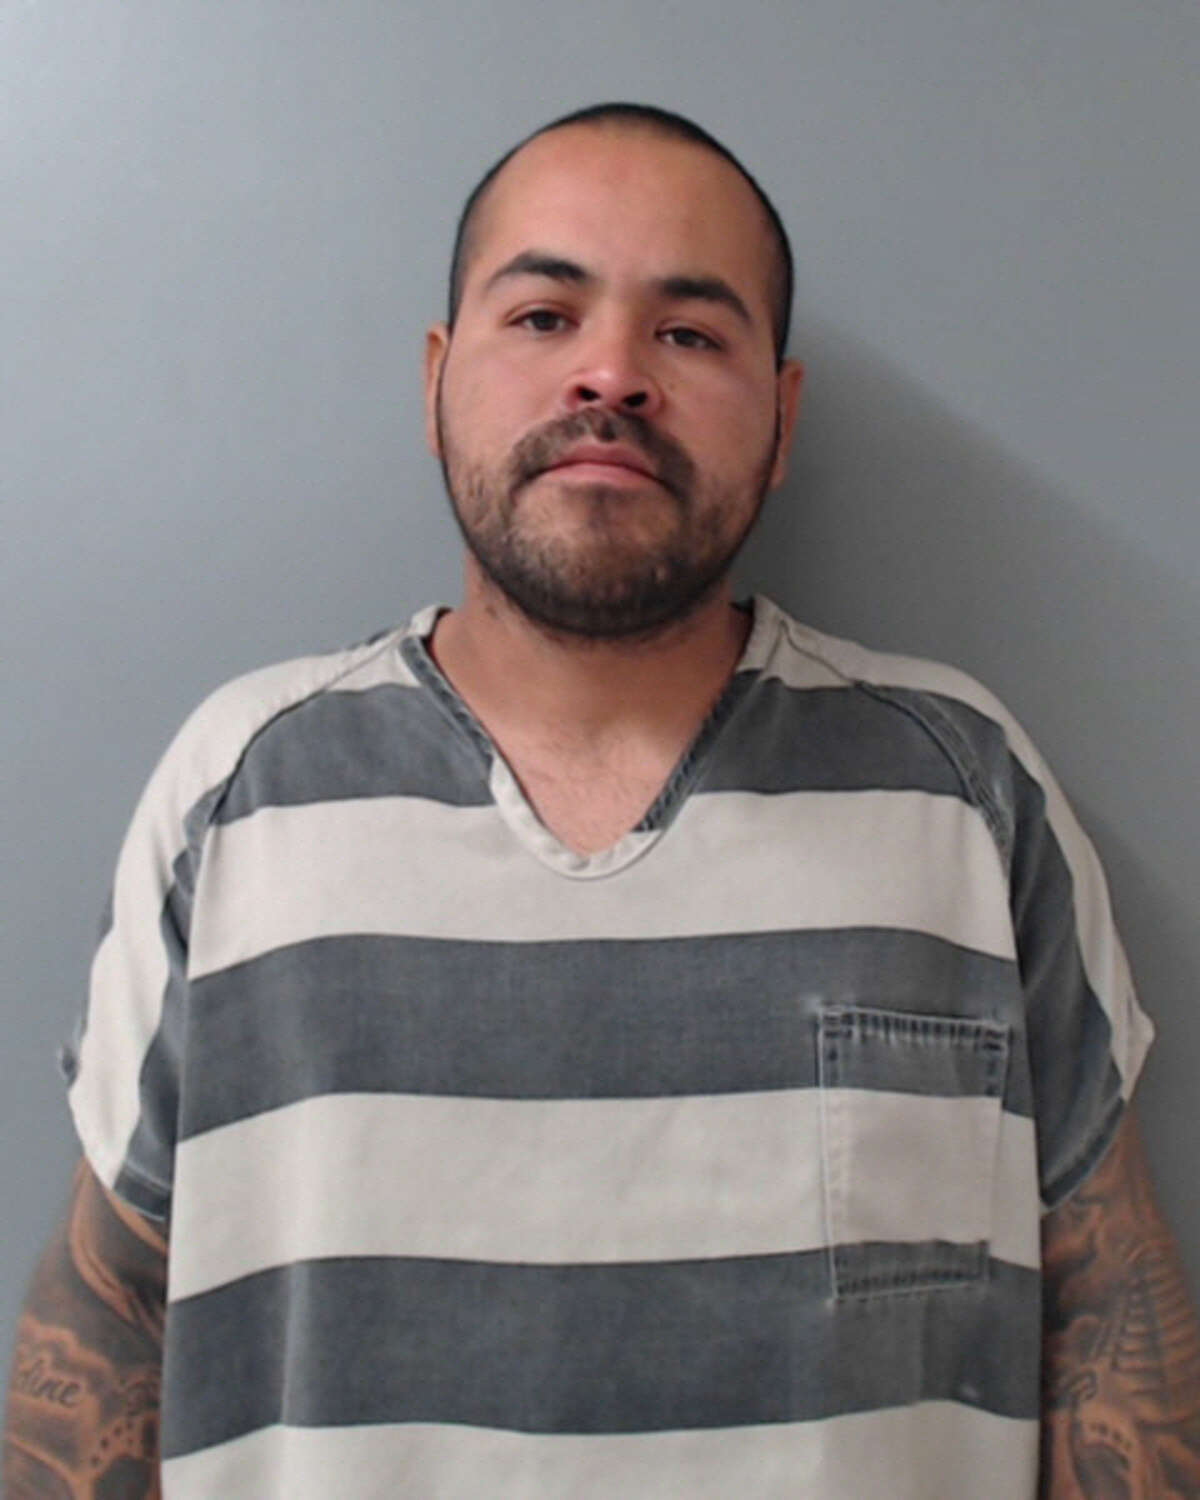 Gerardo Zavala Loredo, 32, was charged with abuse of a human corpse, a state jail felony, and tampering with or fabricating physical evidence by altering, destroying or concealing a human corpse, a second-degree felony.